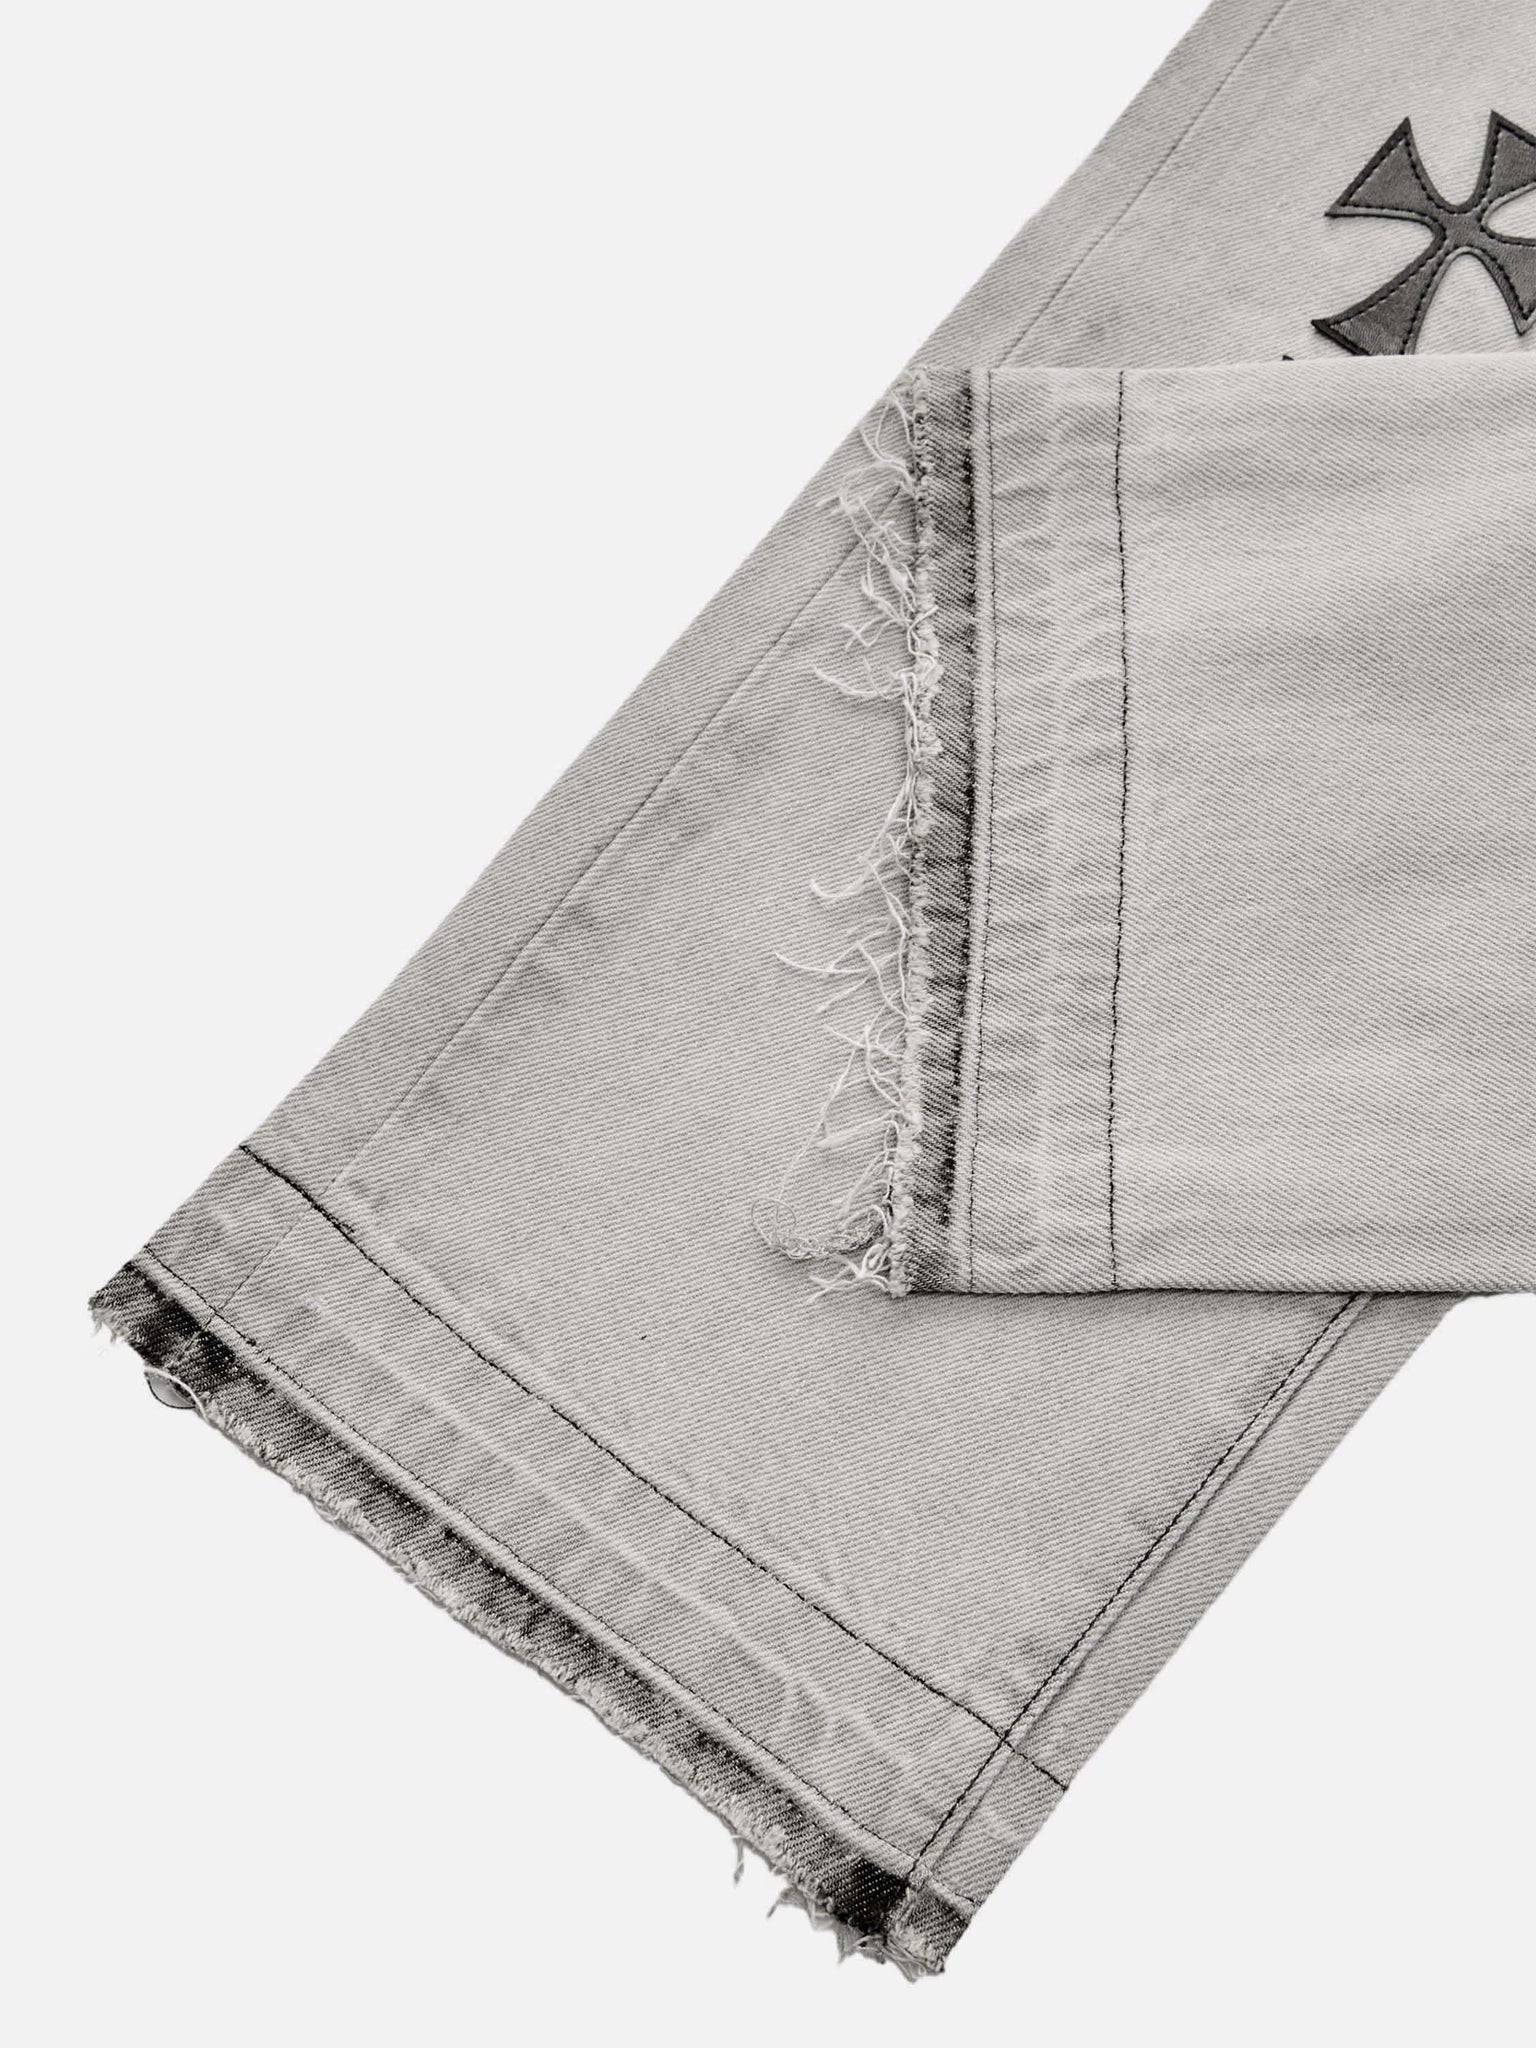 Thesupermade American Vintage Jeans